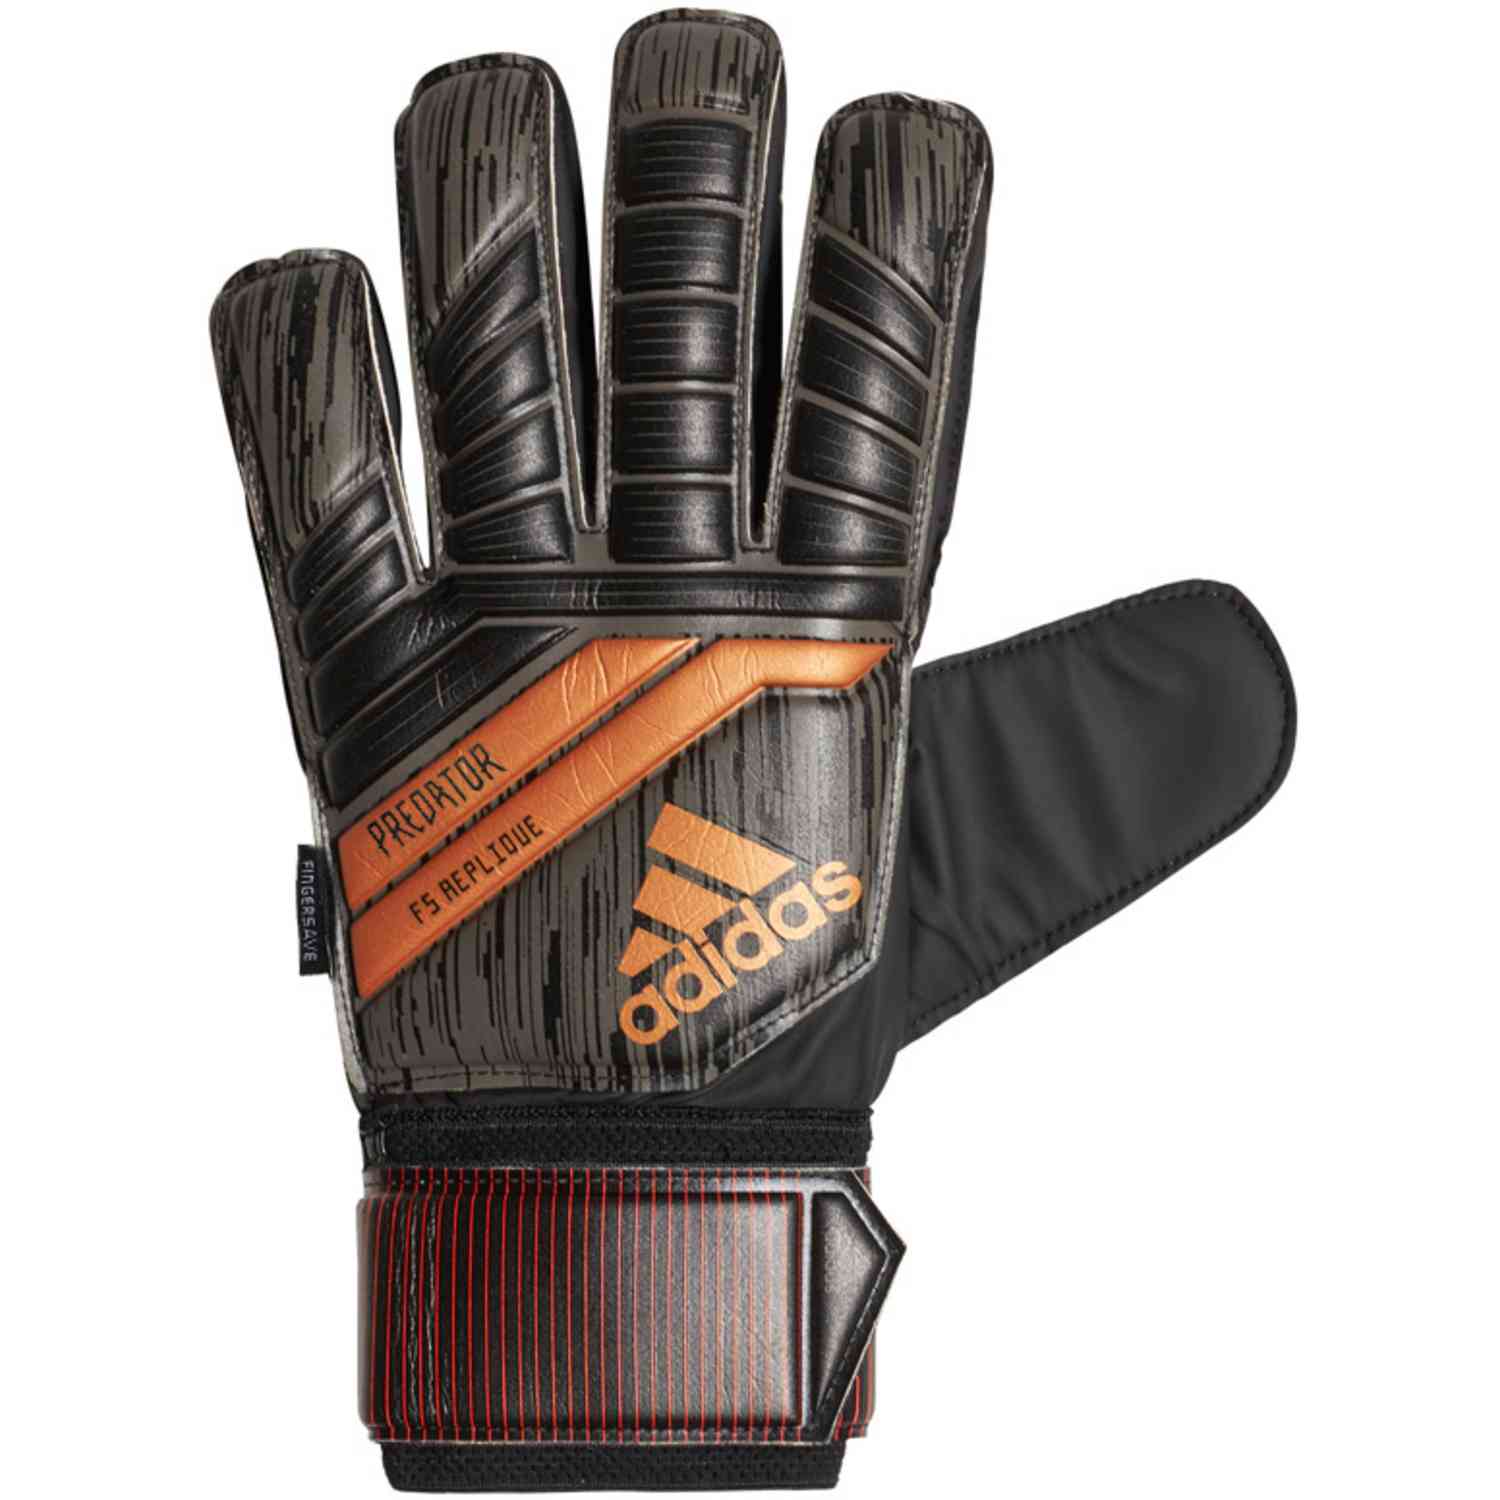 adidas Predator Fingersave Replique Keeper Gloves - Black and Solar Red